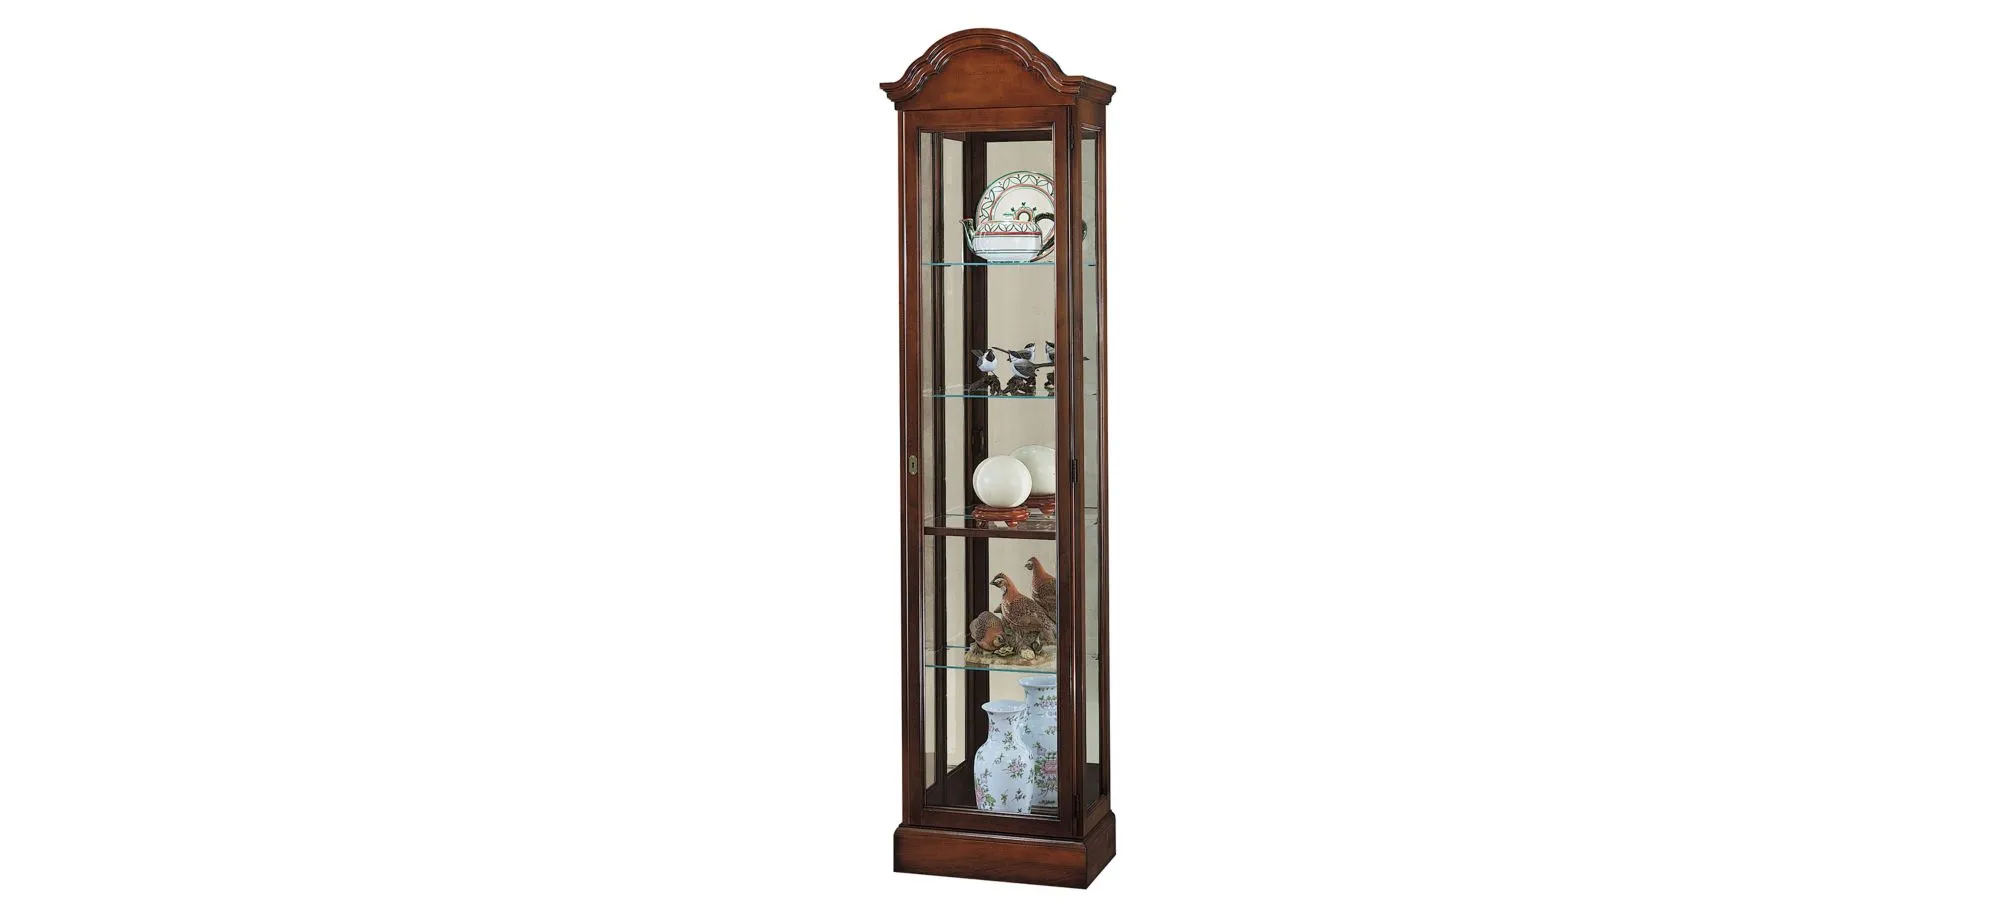 Gilmore Curio Cabinet in Windsor Cherry by Howard Miller Clock